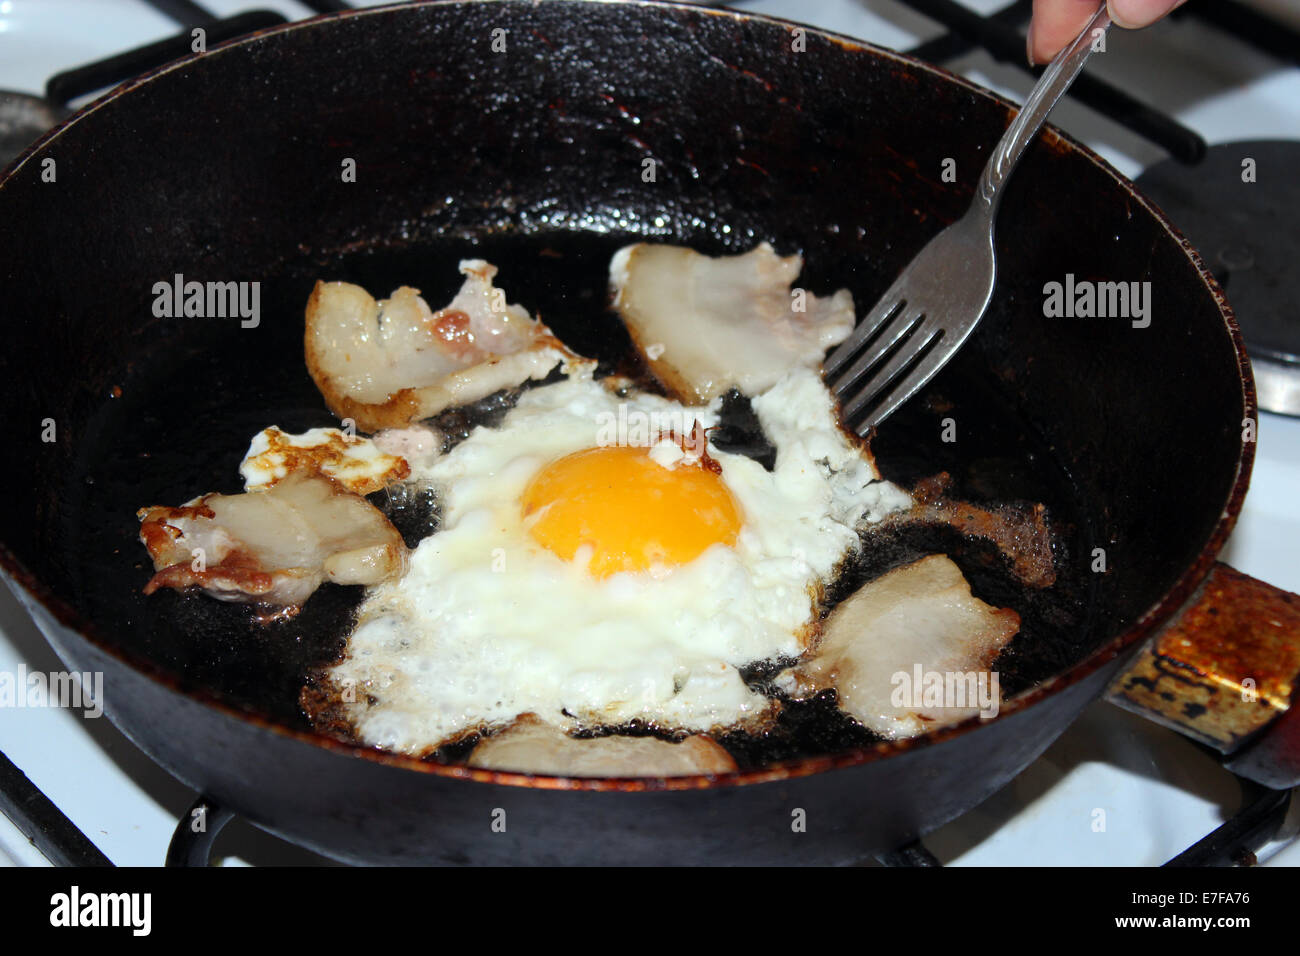 image of appetizing fried egg during cooking Stock Photo